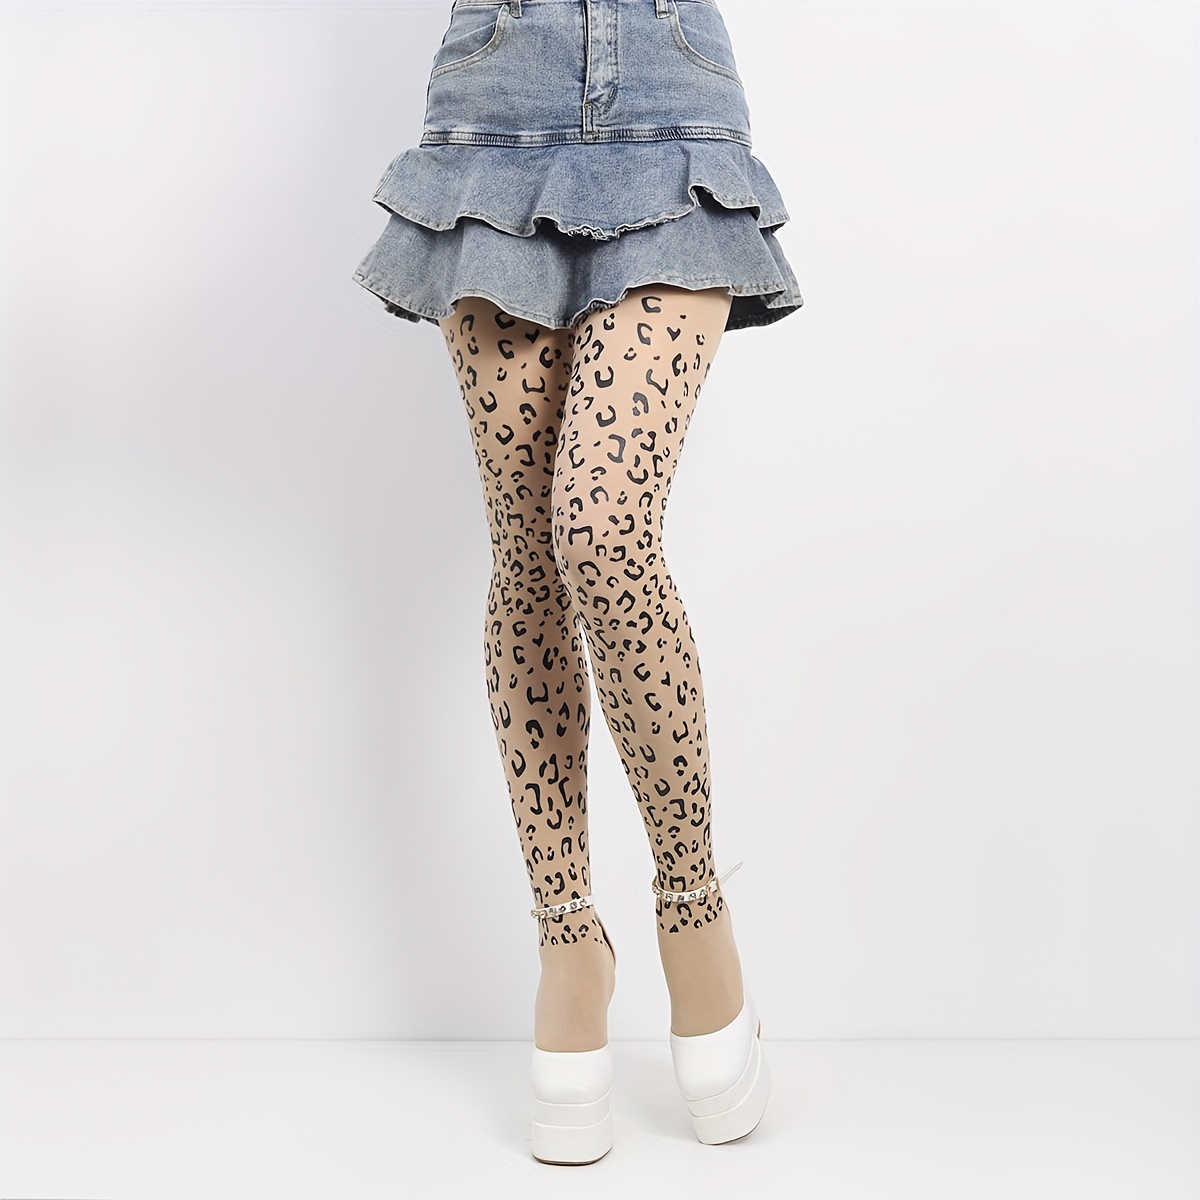 Leopard Printed Tights for Women. Black Sexy Sheer Lolita Pantyhose Hosiery  Tights. Transparent Lingerie. 